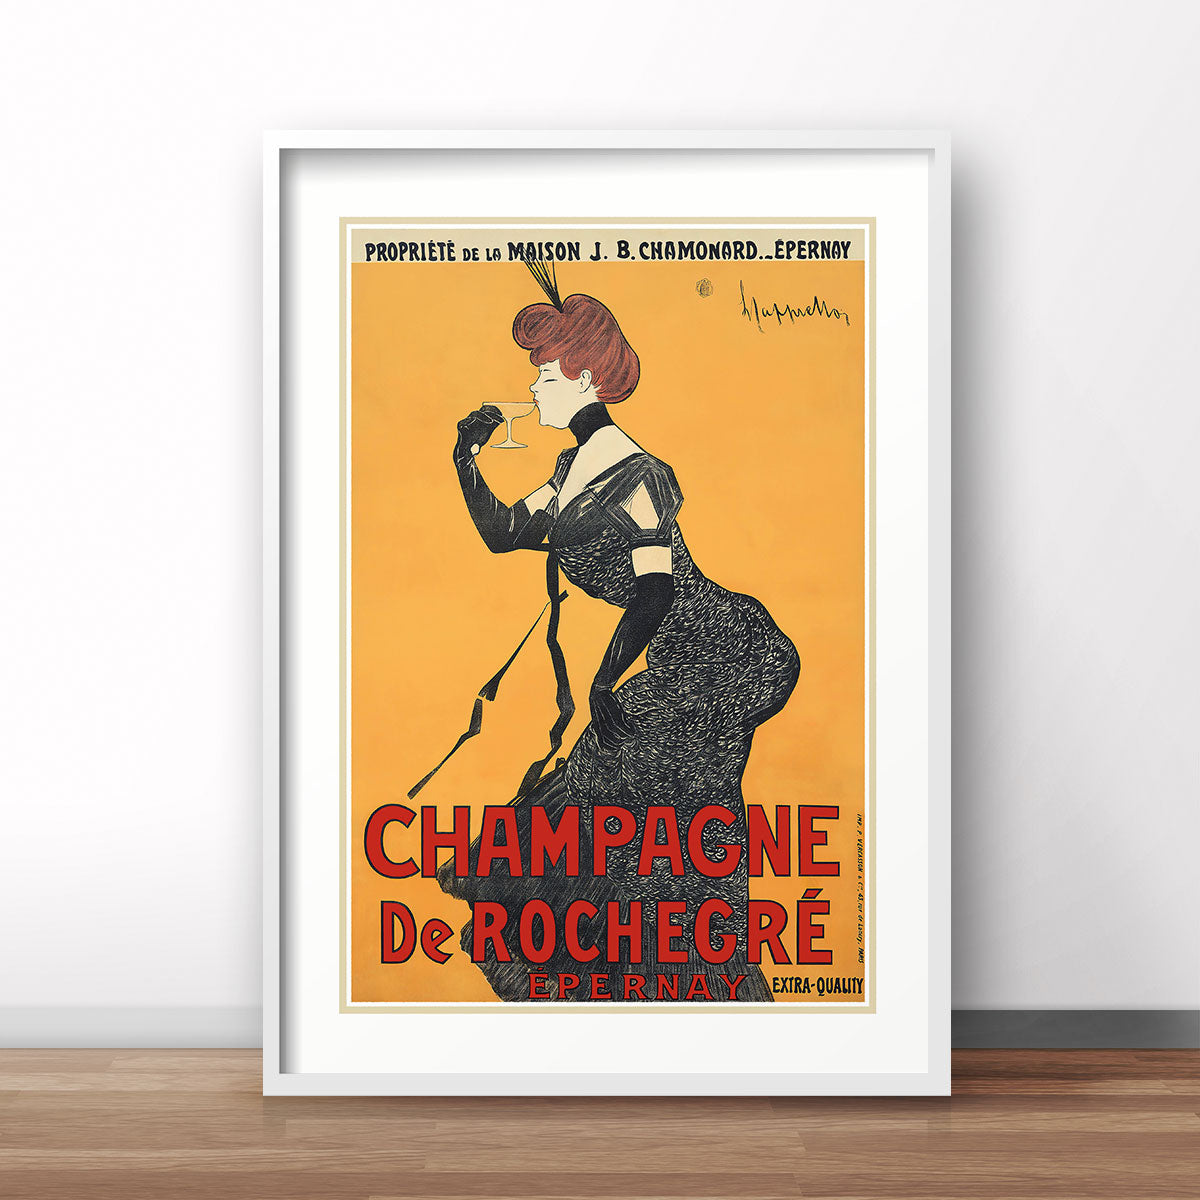 French Champagne vintage retro advertising poster | Places We Luv